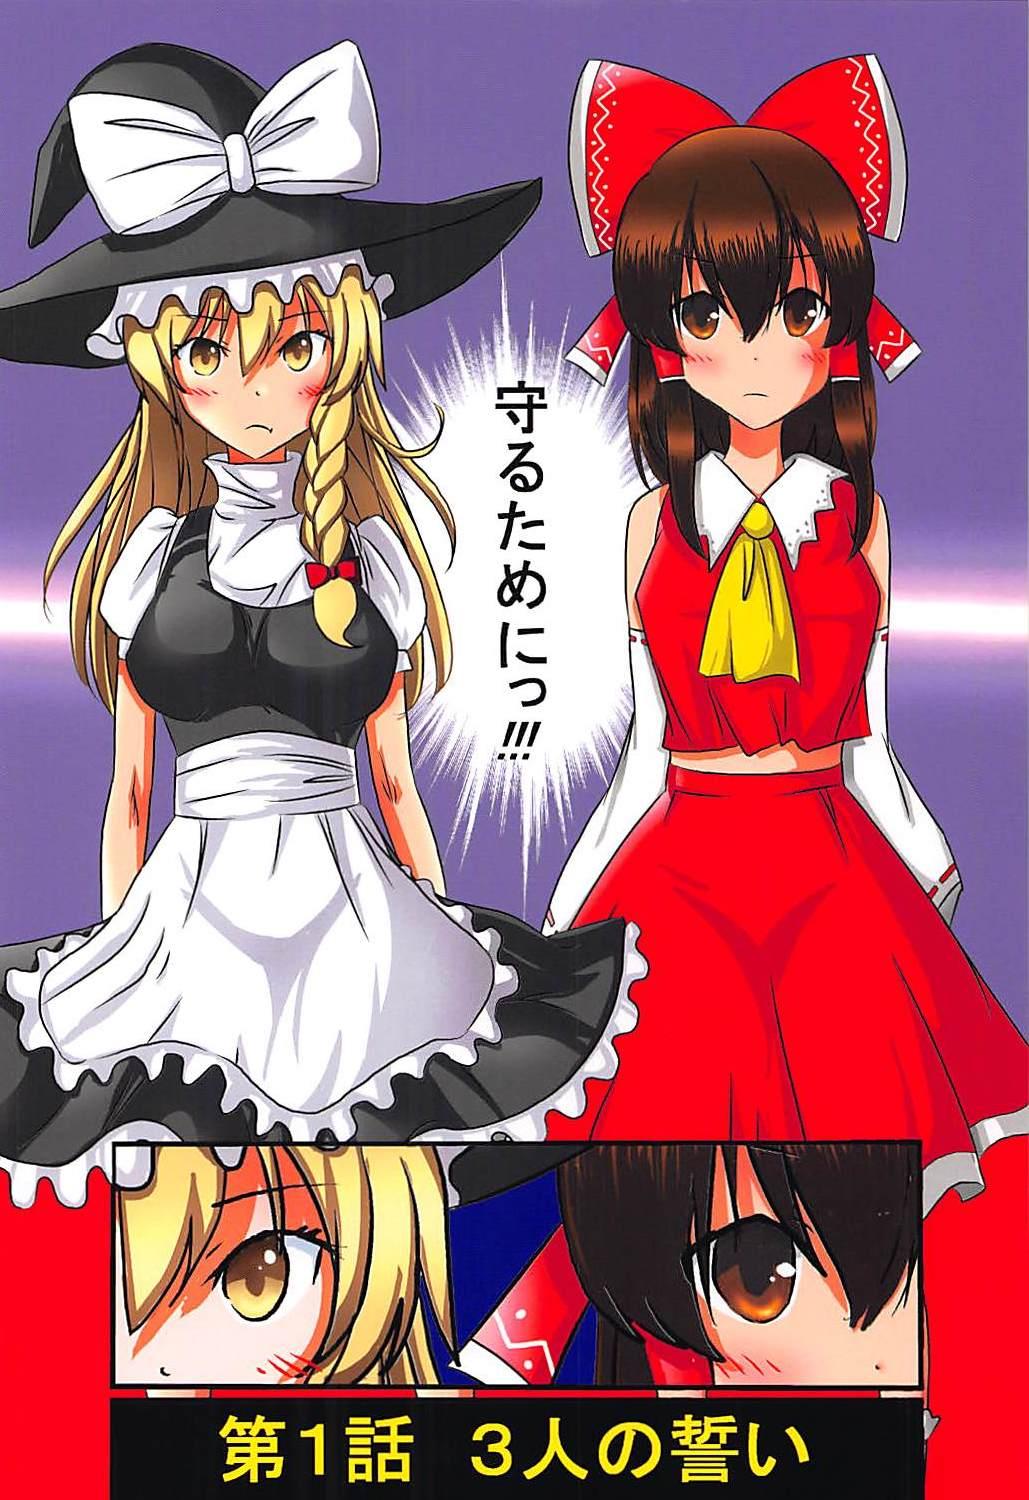 Spain Touhou Ero ProWres Match - Touhou project Swinger - Page 4